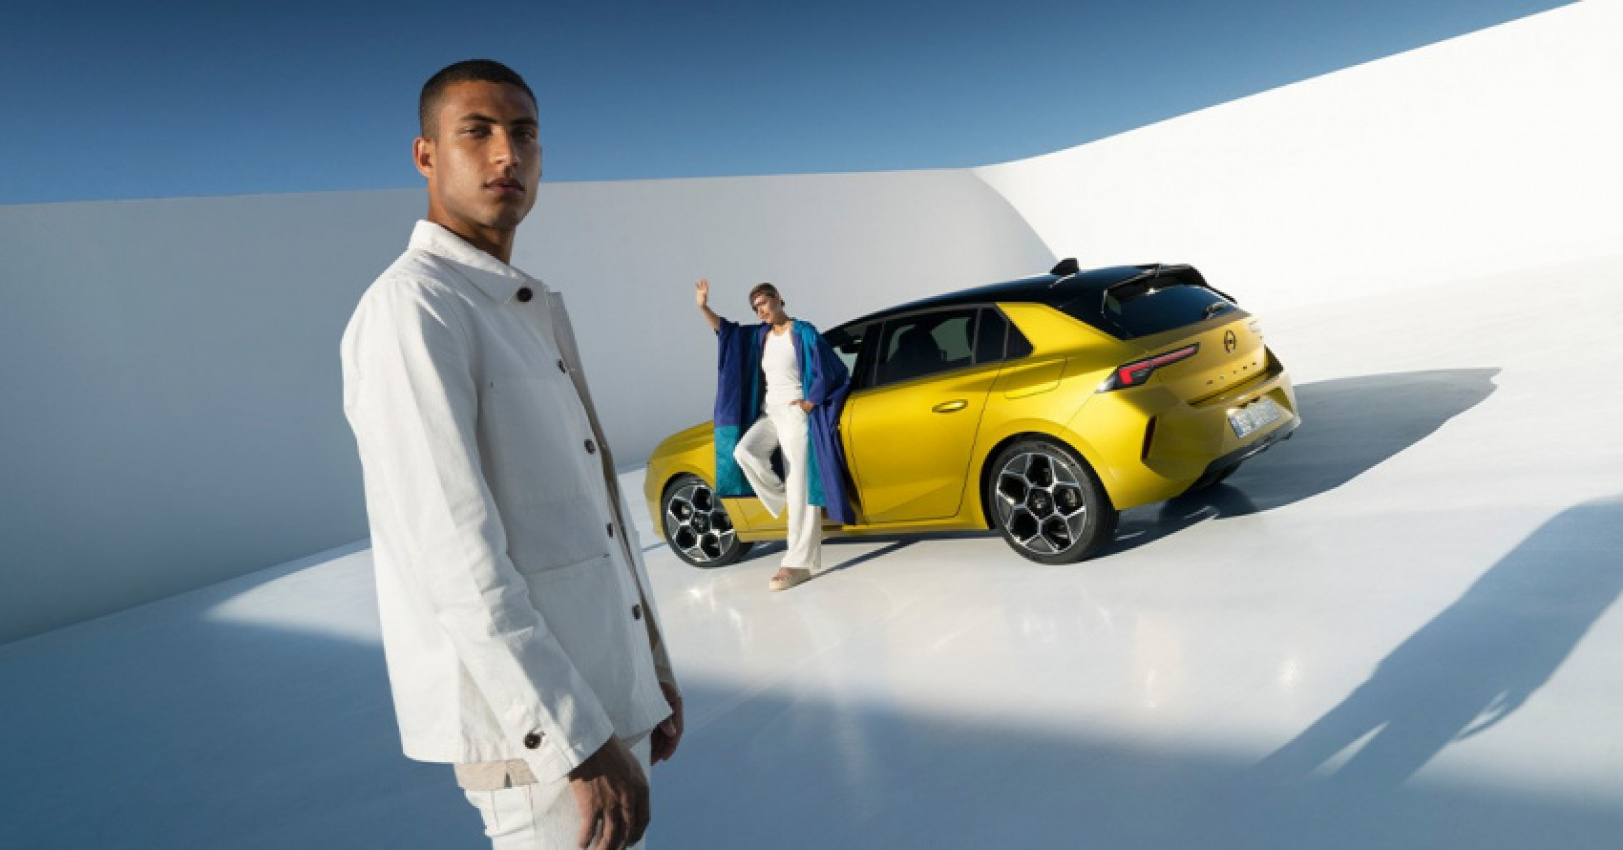 autos, cars, automotive industry, business, car, cars, driven, driven nz, electric cars, motoring, national, new zealand, news, nz, opel launches rebate range for new zealand, opel launches rebate range for new zealand